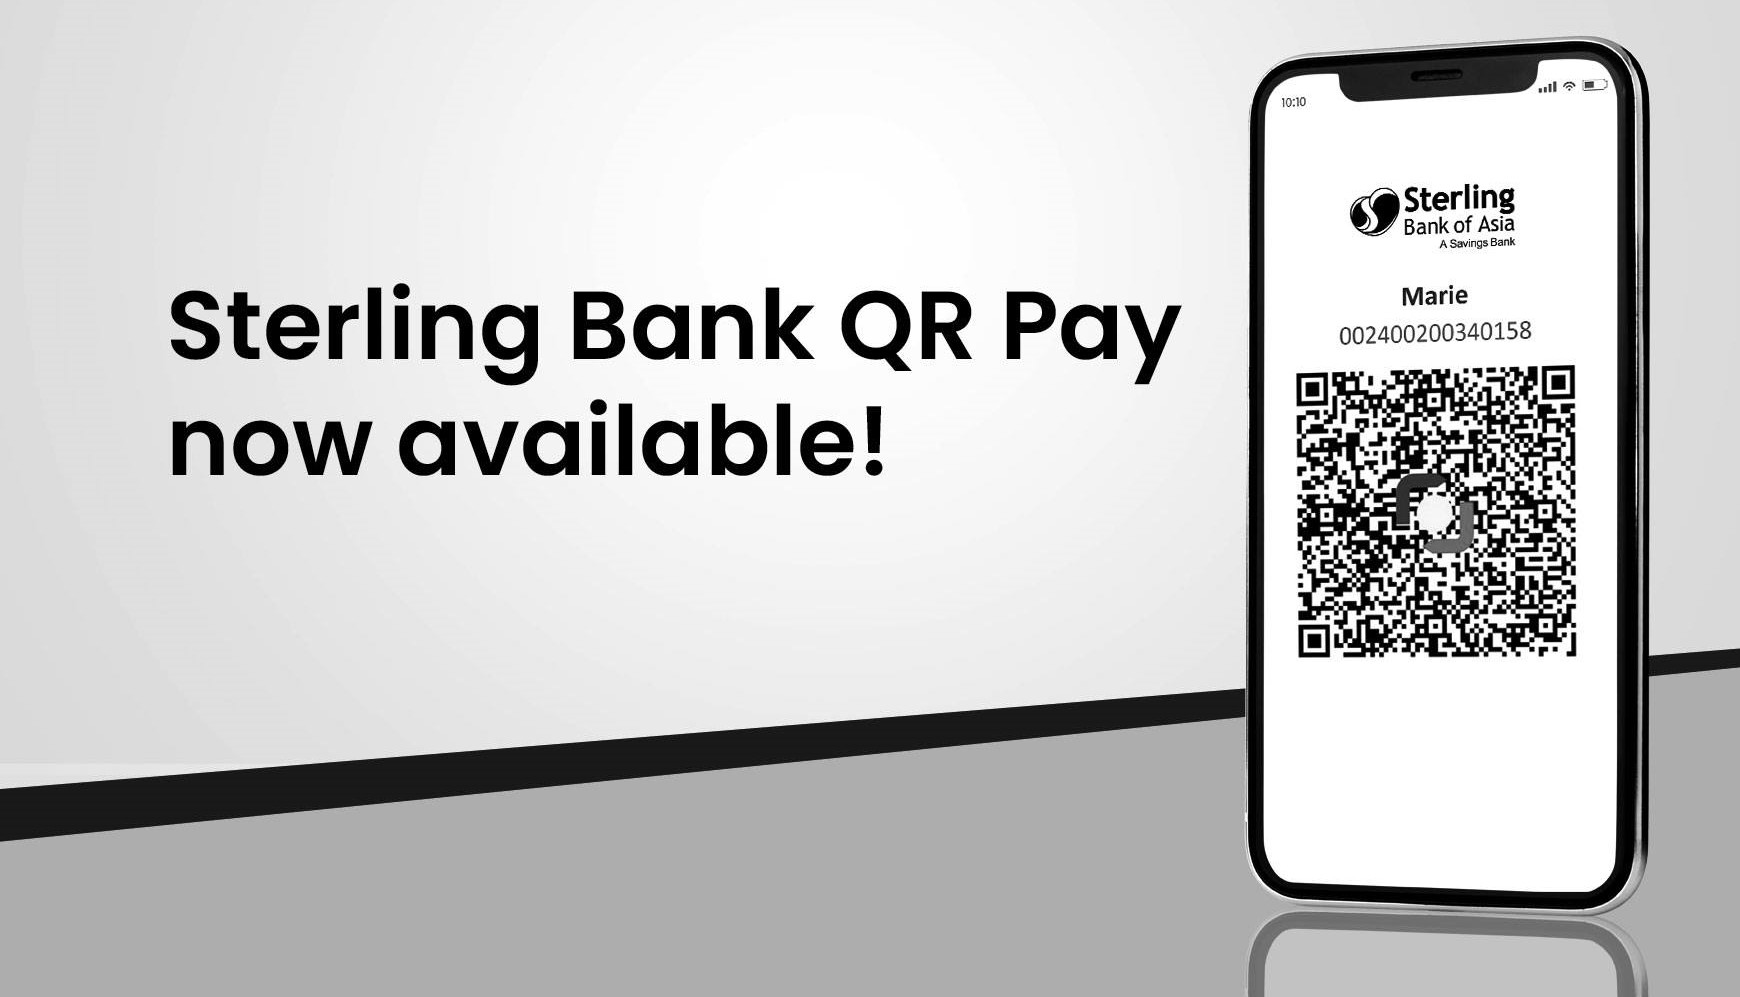 sterling-bank-addresses-banking-needs-of-clients-by-adapting-to-digital-payments-through-qr-code